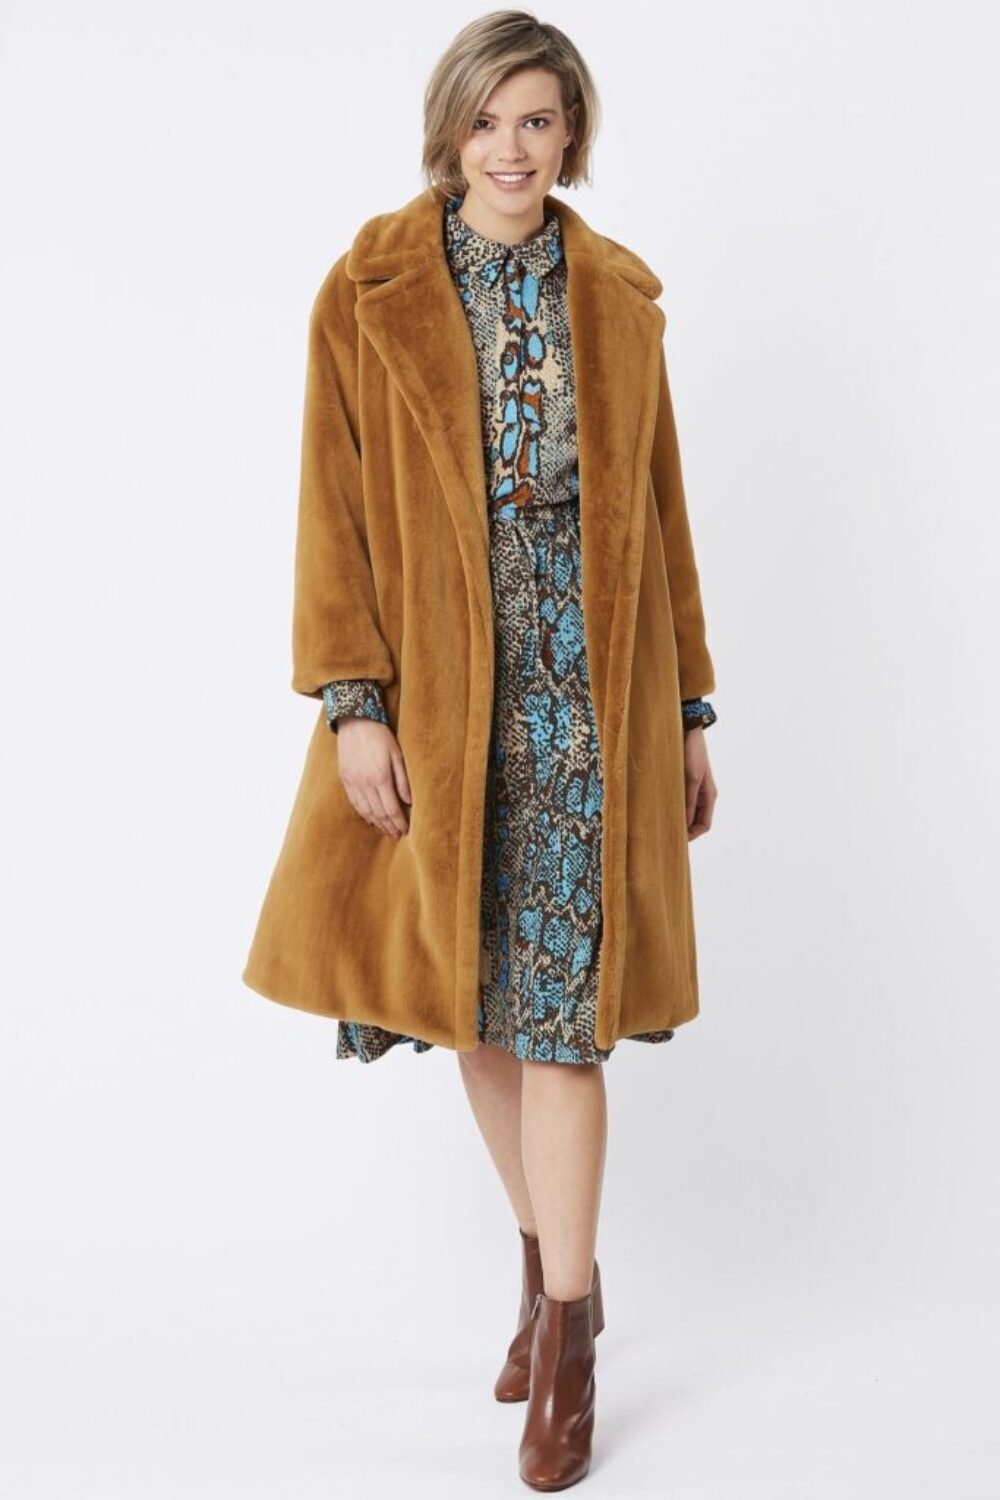 Shop Lux Mocha Faux Fur Midi Shaved Shearling Coat and women's luxury and designer clothes at www.lux-apparel.co.uk